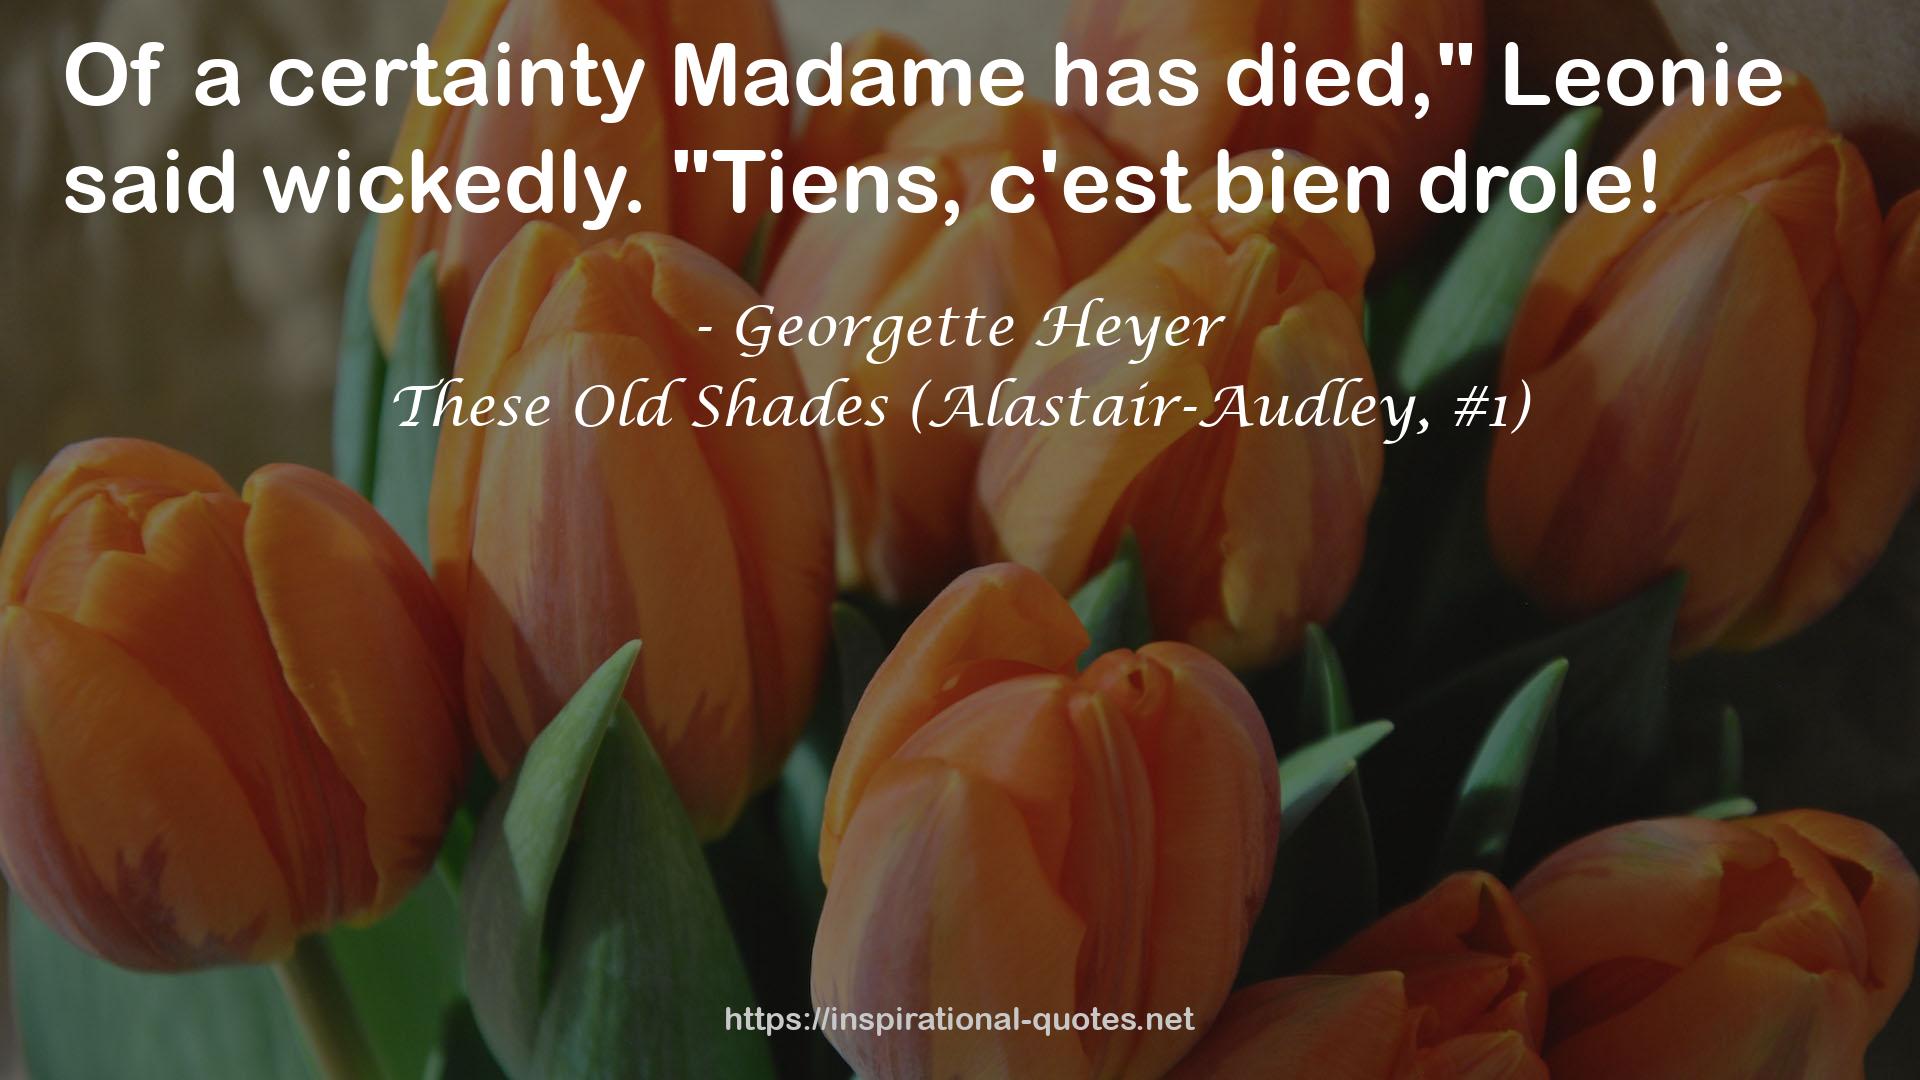 These Old Shades (Alastair-Audley, #1) QUOTES